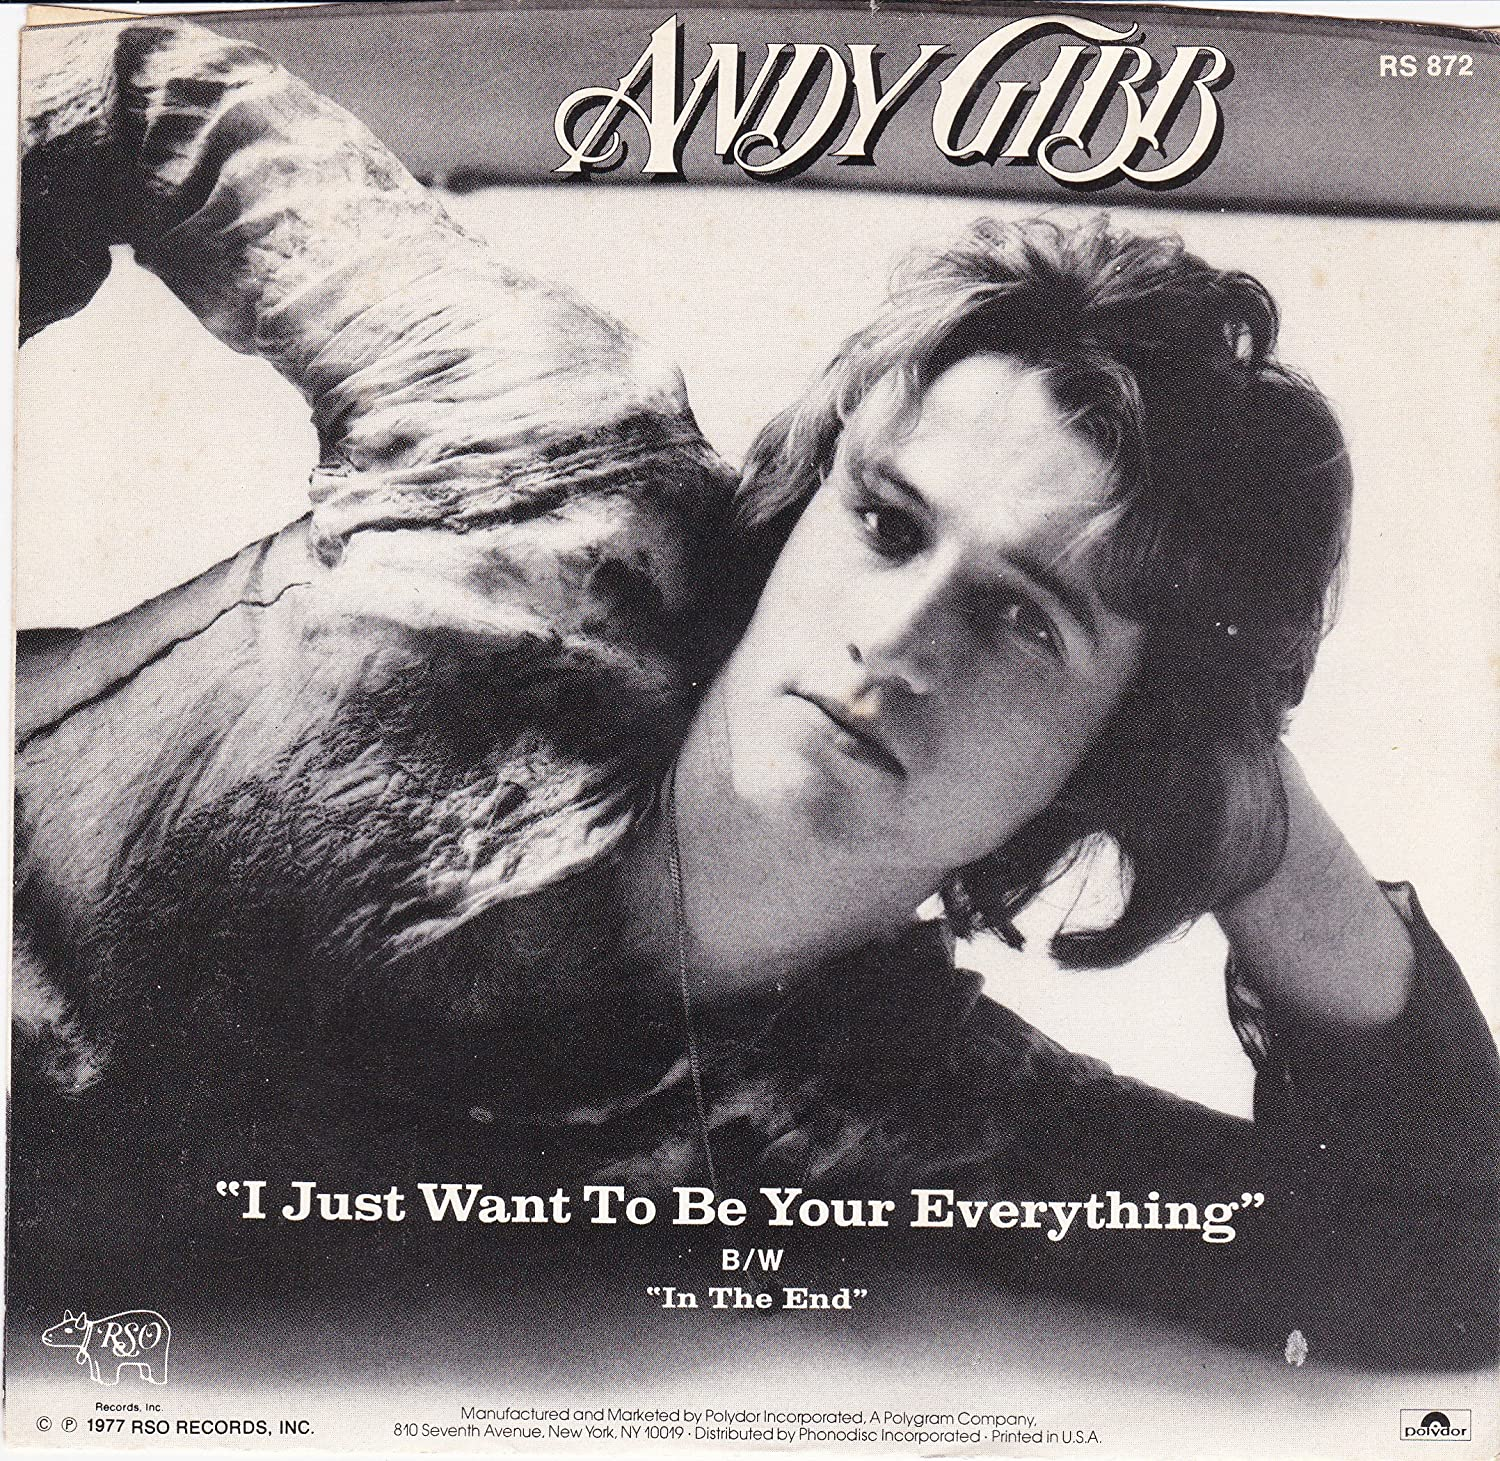 Full Lyrics Of I Just Want to Be Your Everything - by Andy Gibb